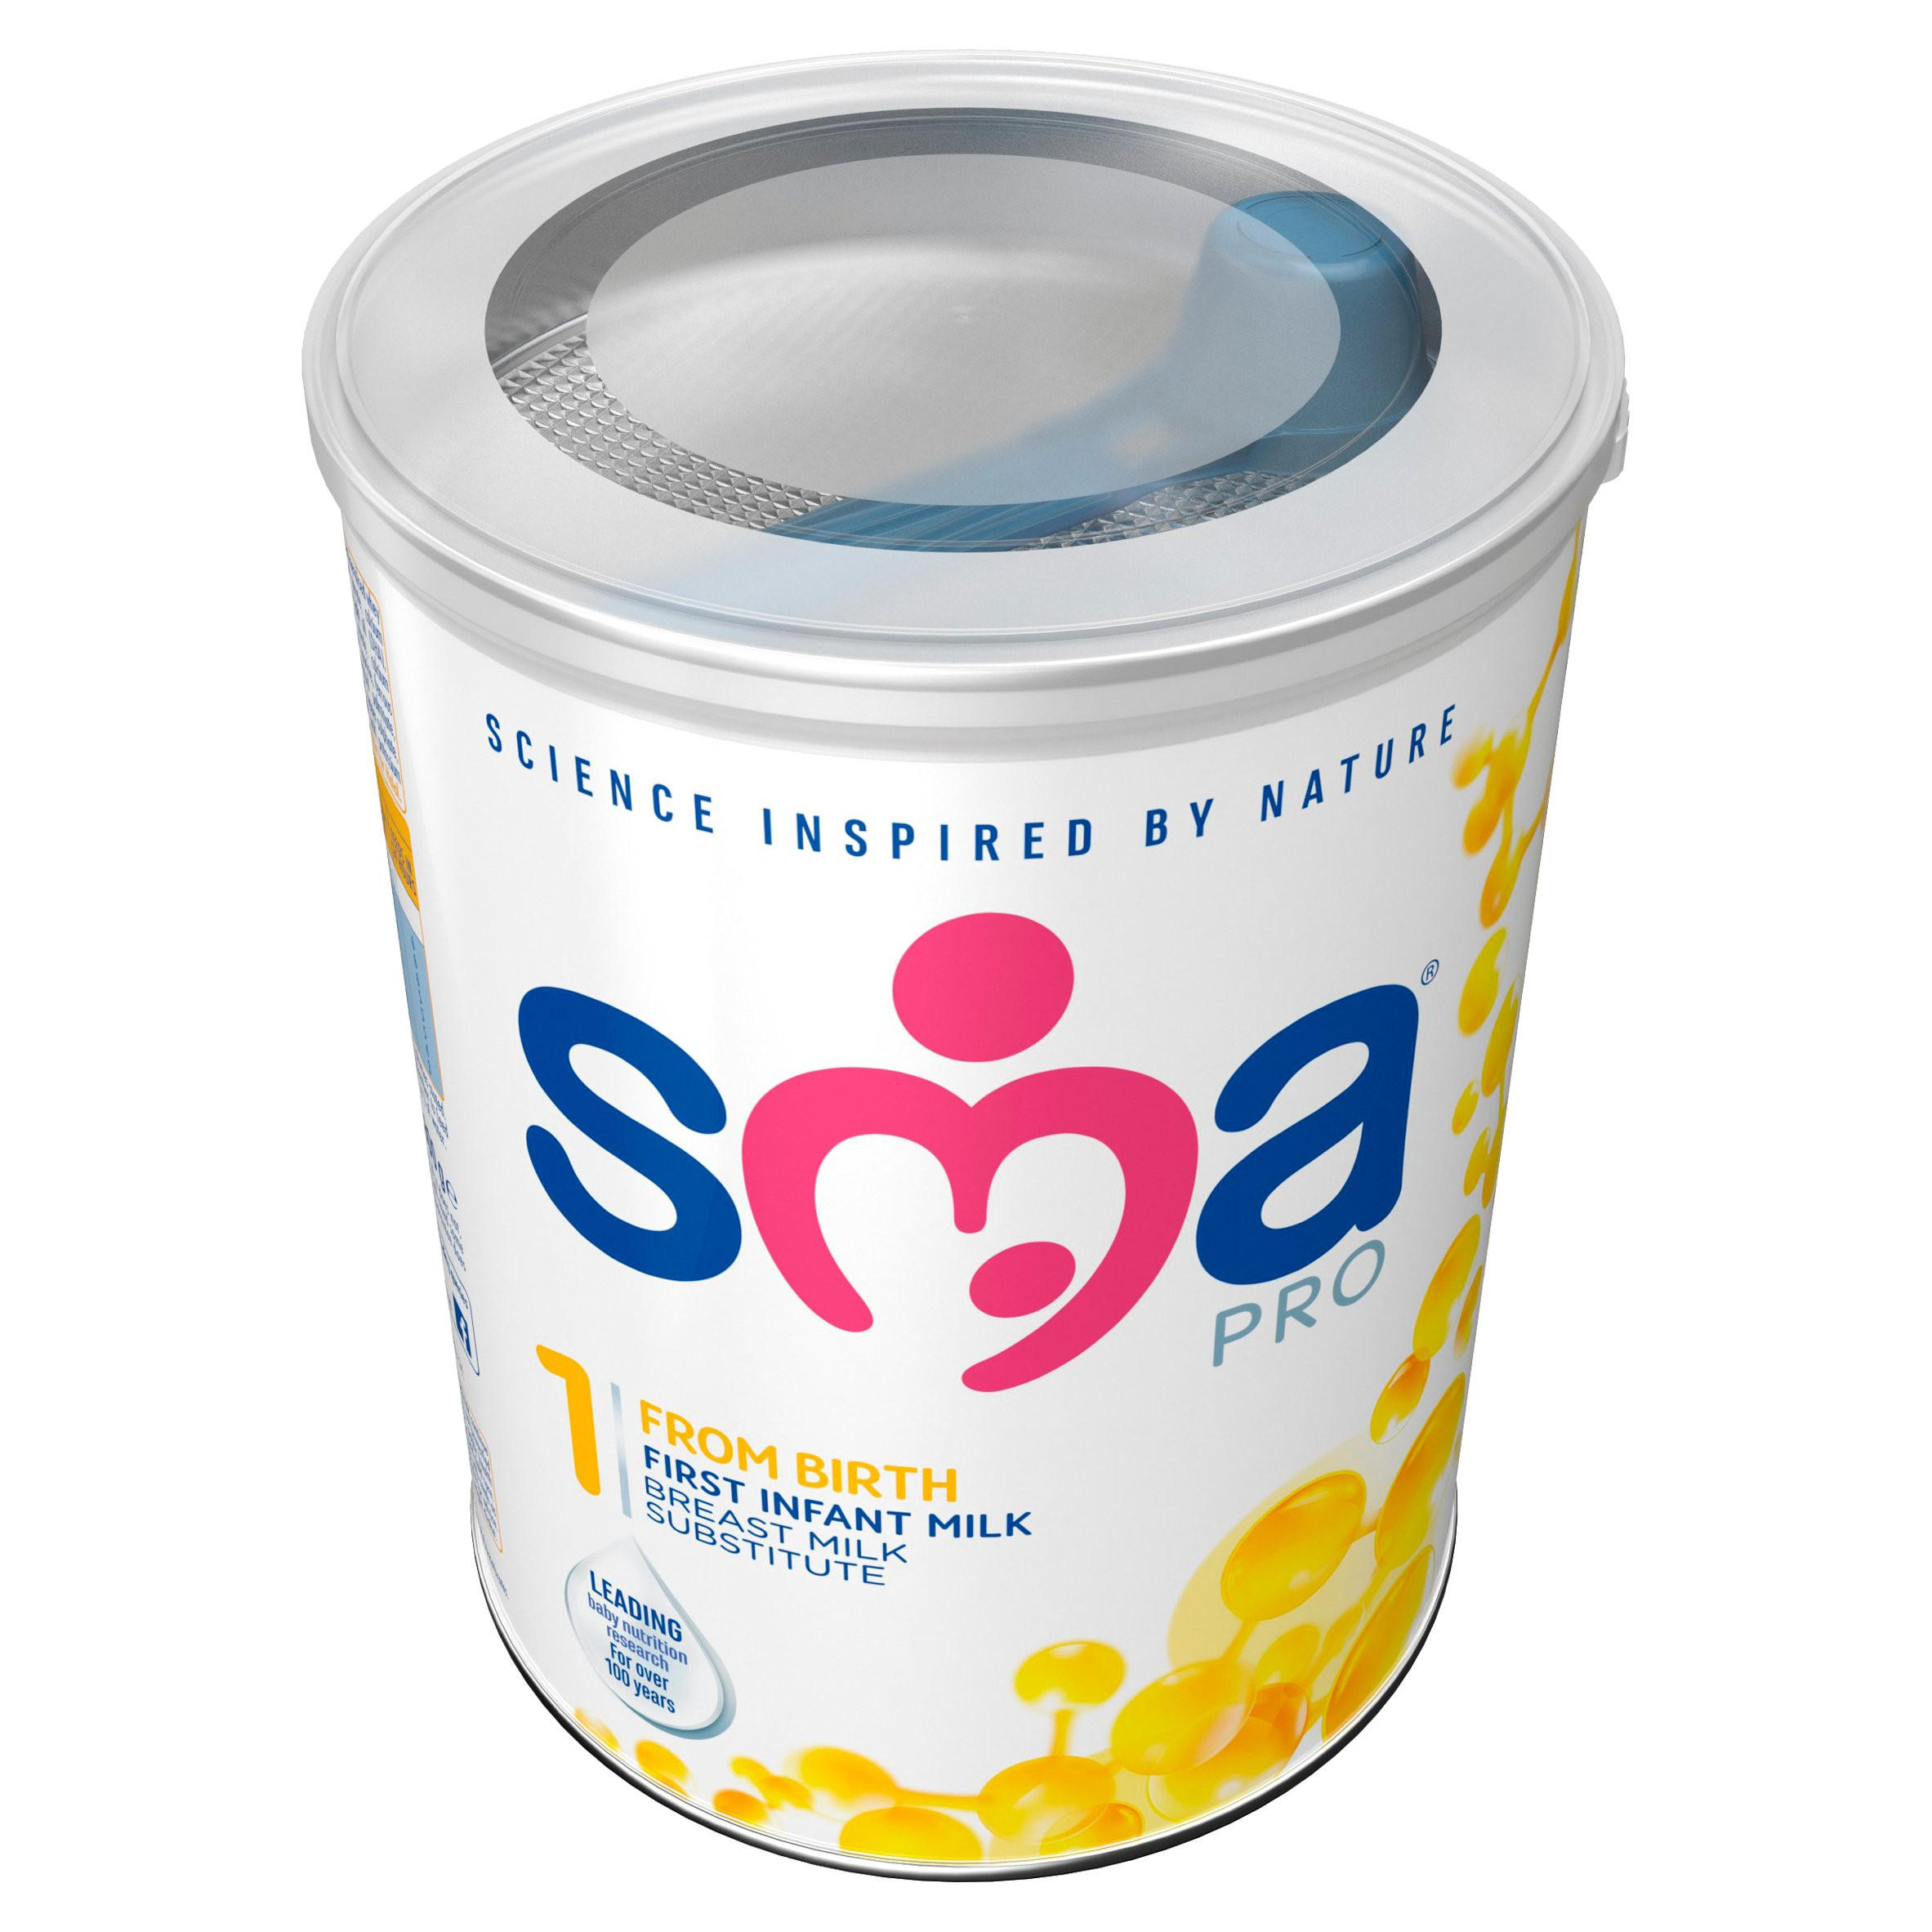 SMA® PRO First Infant Milk from Birth 800g